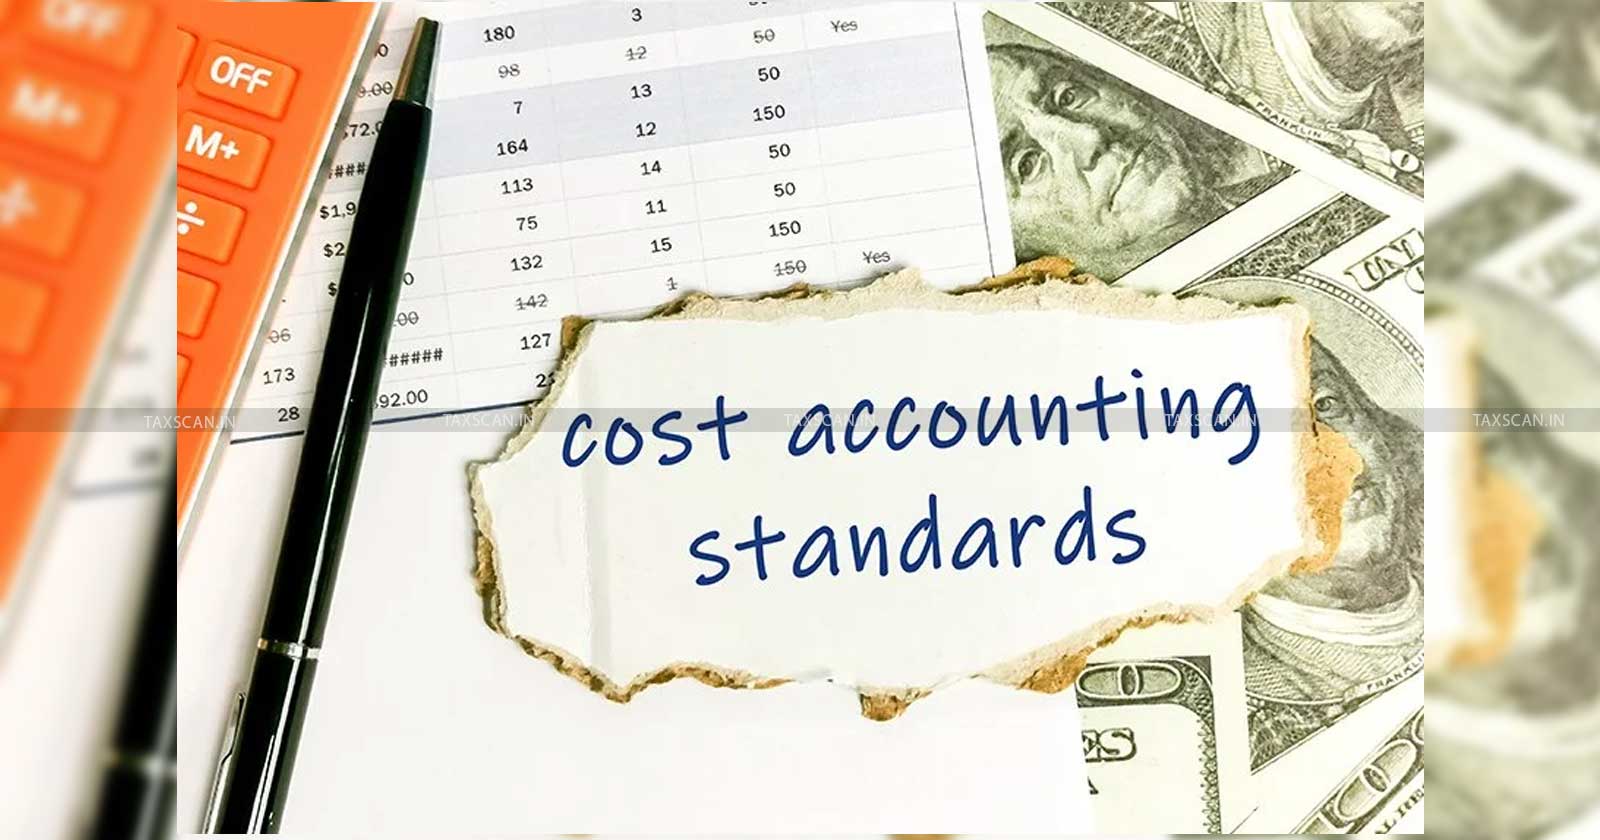 CESTAT - CESTAT Ahmedabad - Readjudication - Non compliance with cost accounting standard - CESTAT directs Re-Adjudication - Cost Accounting Standard - TAXSCAN